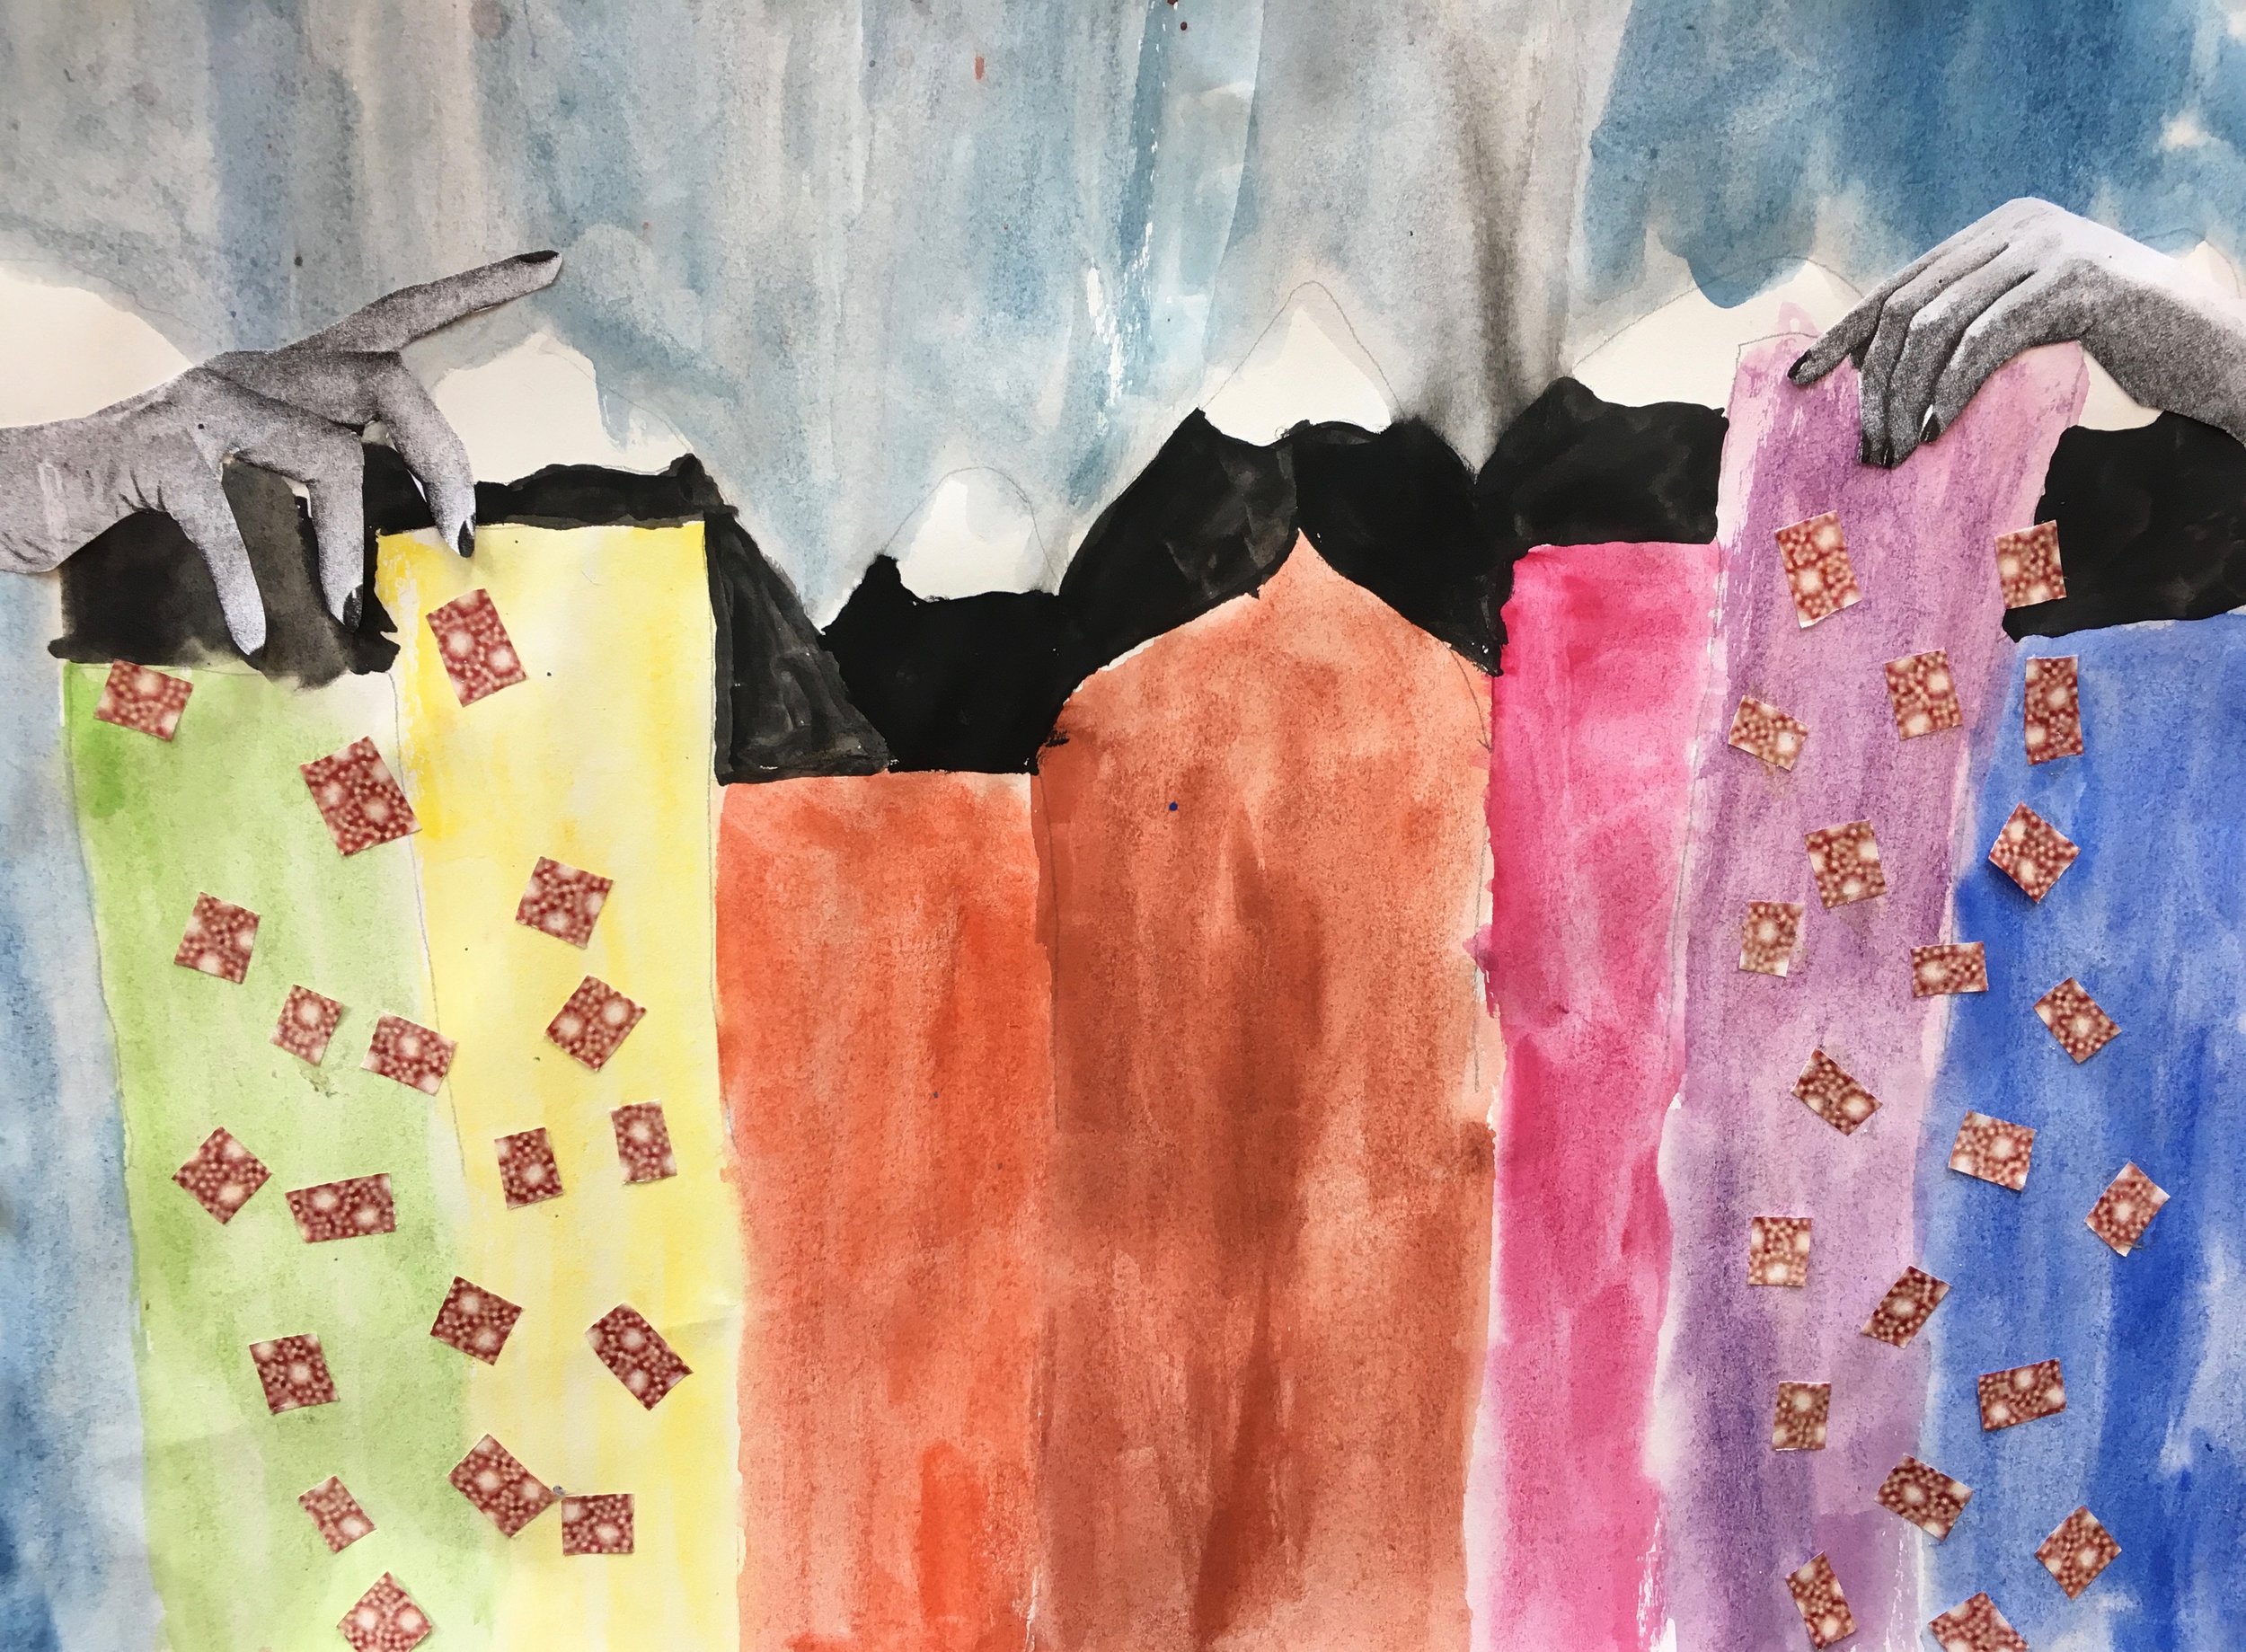 Artist Residency - 5 day project at Osmani Primary School, July 2019